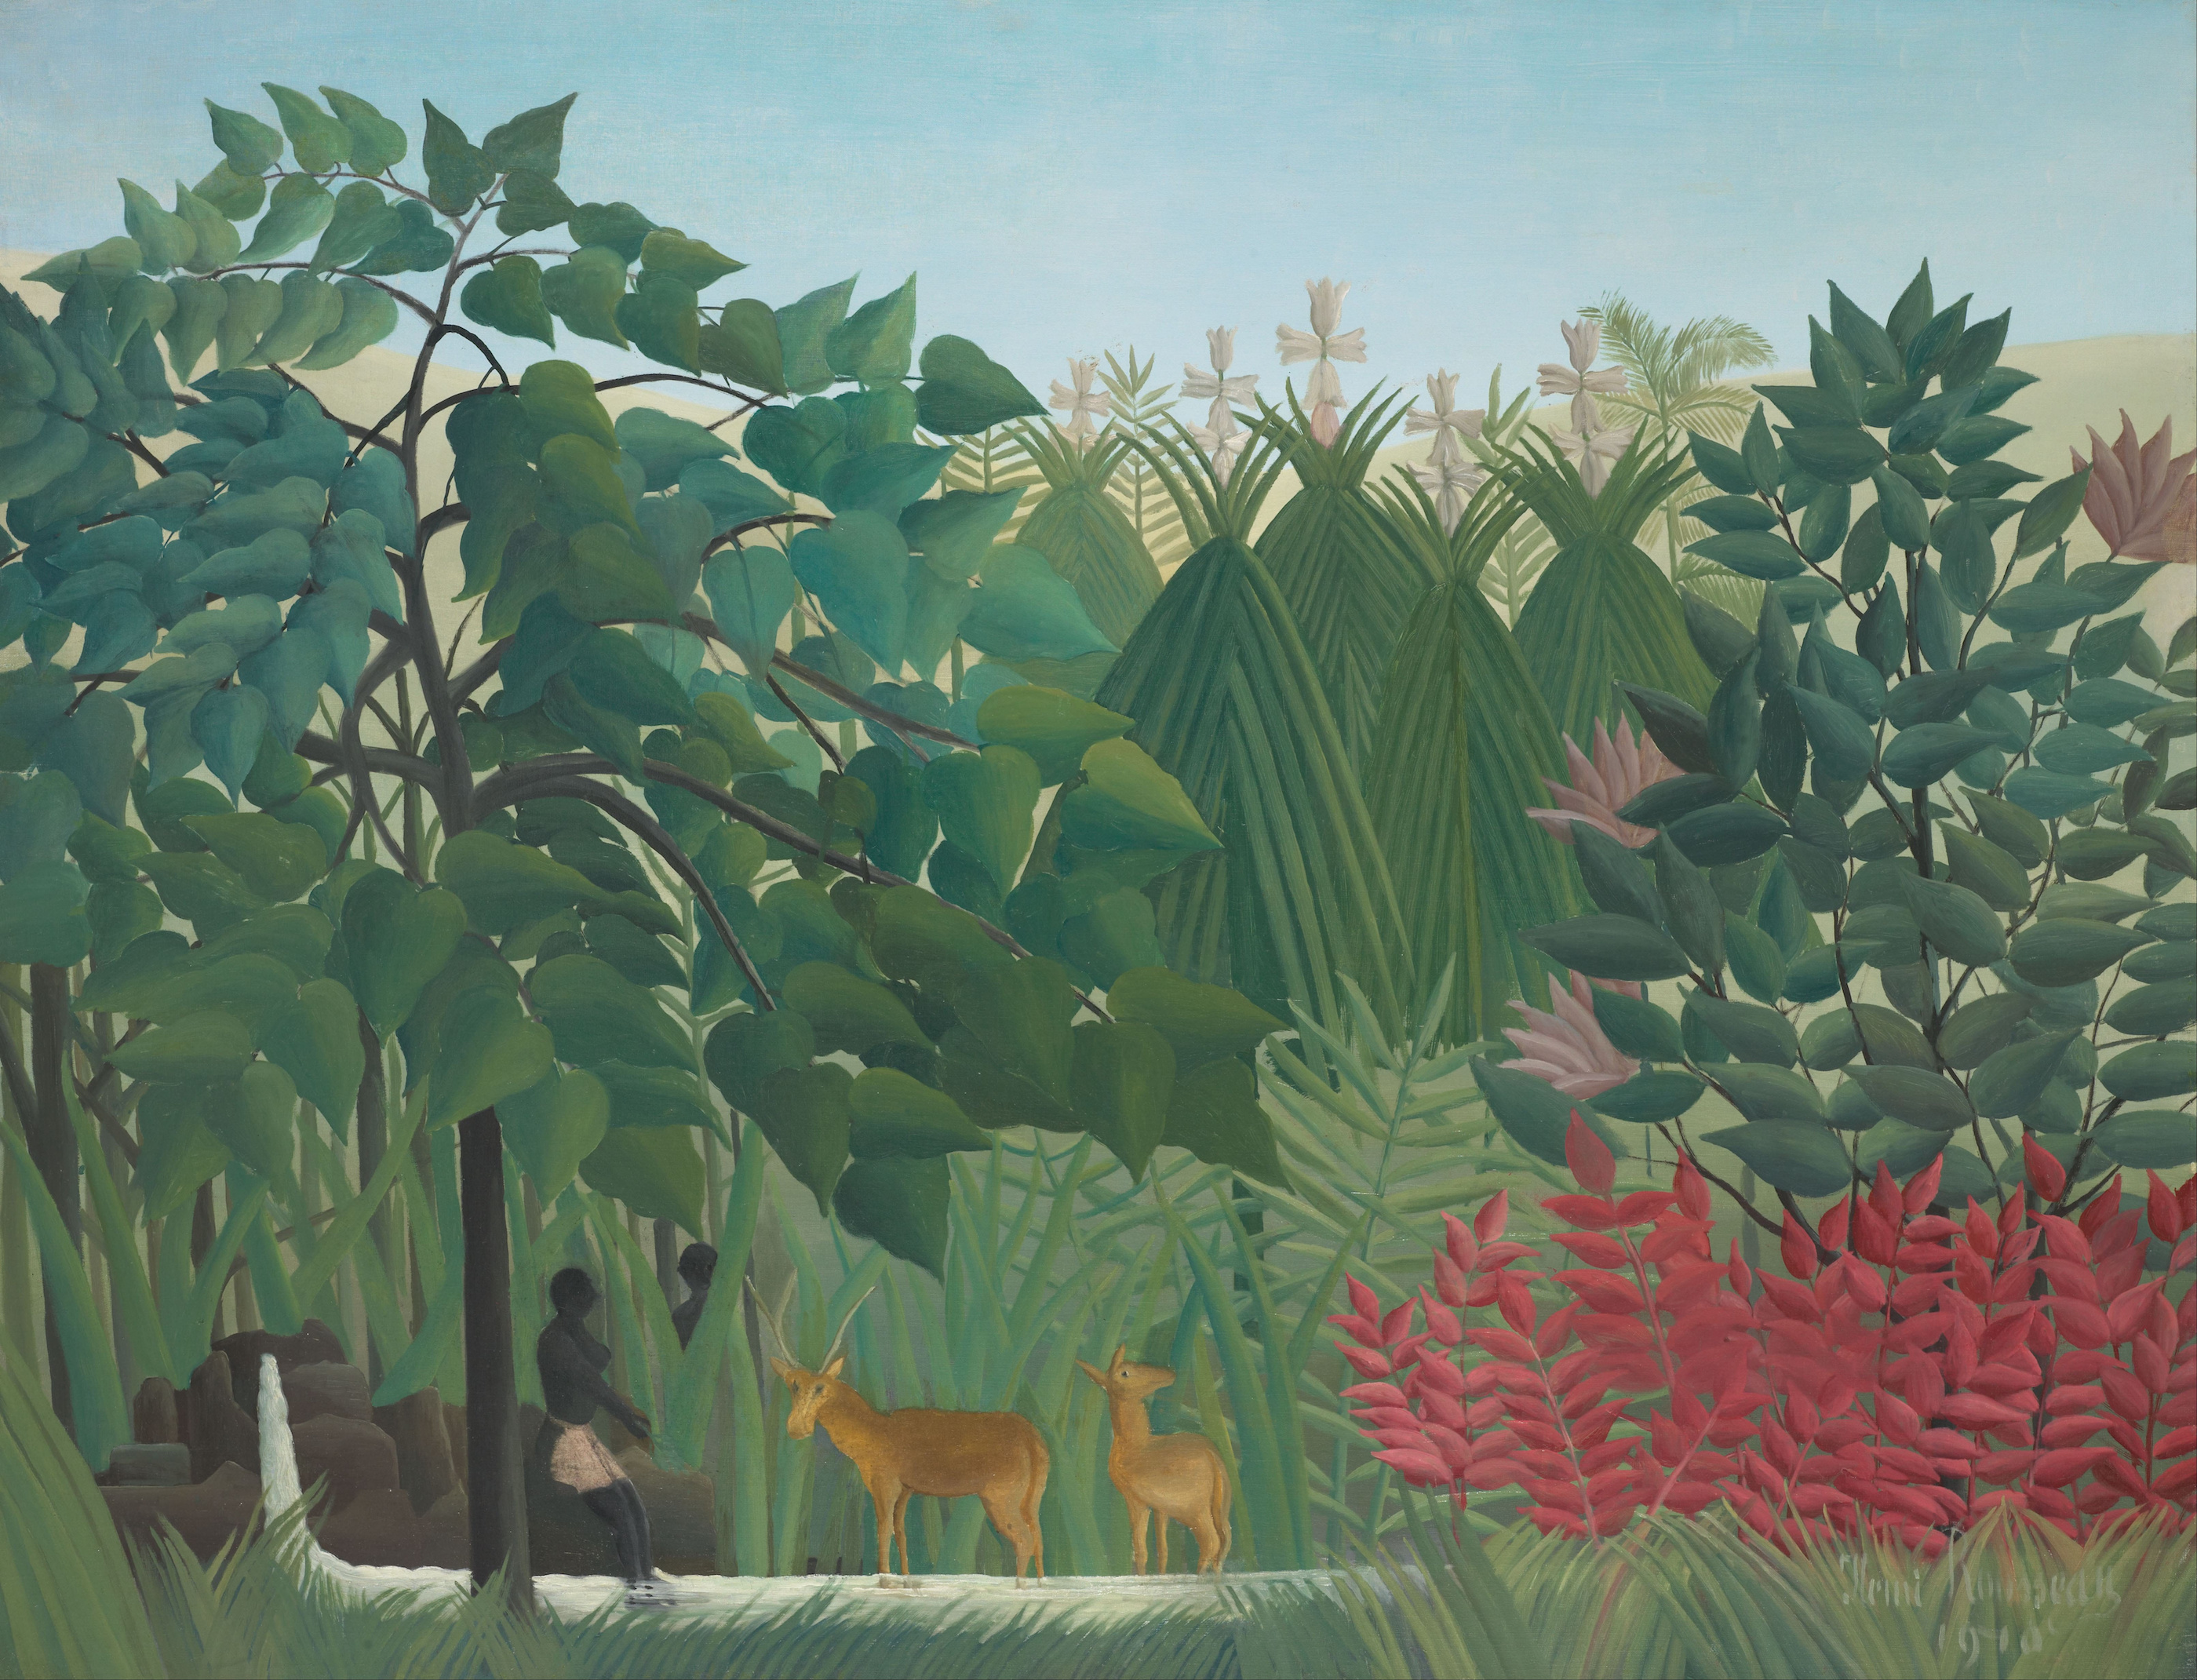 The Waterfall by Henri Rousseau - 1910 - 116.2 × 150.2 cm Art Institute of Chicago